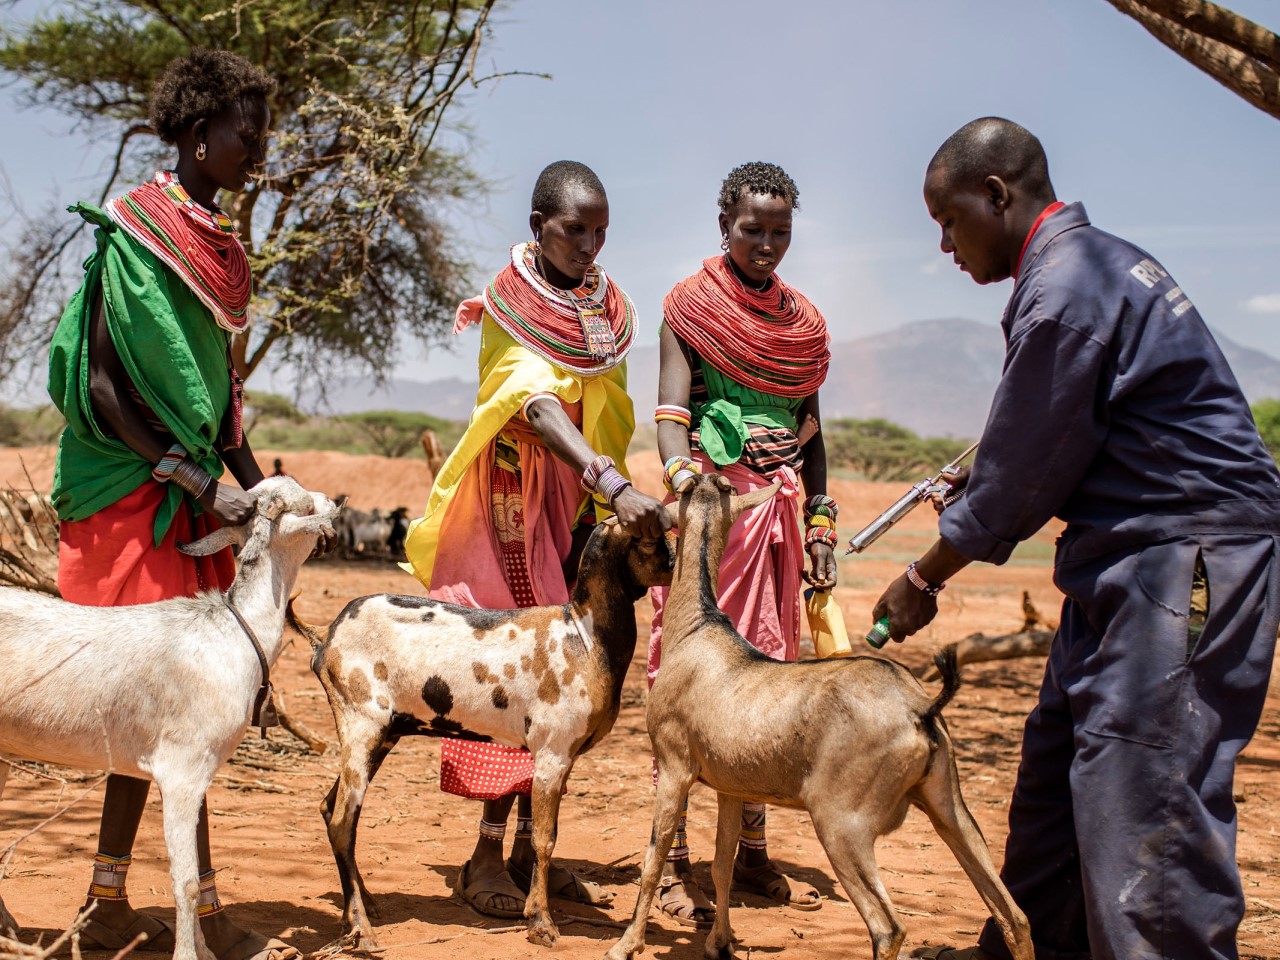 Image of people vaccinating goats